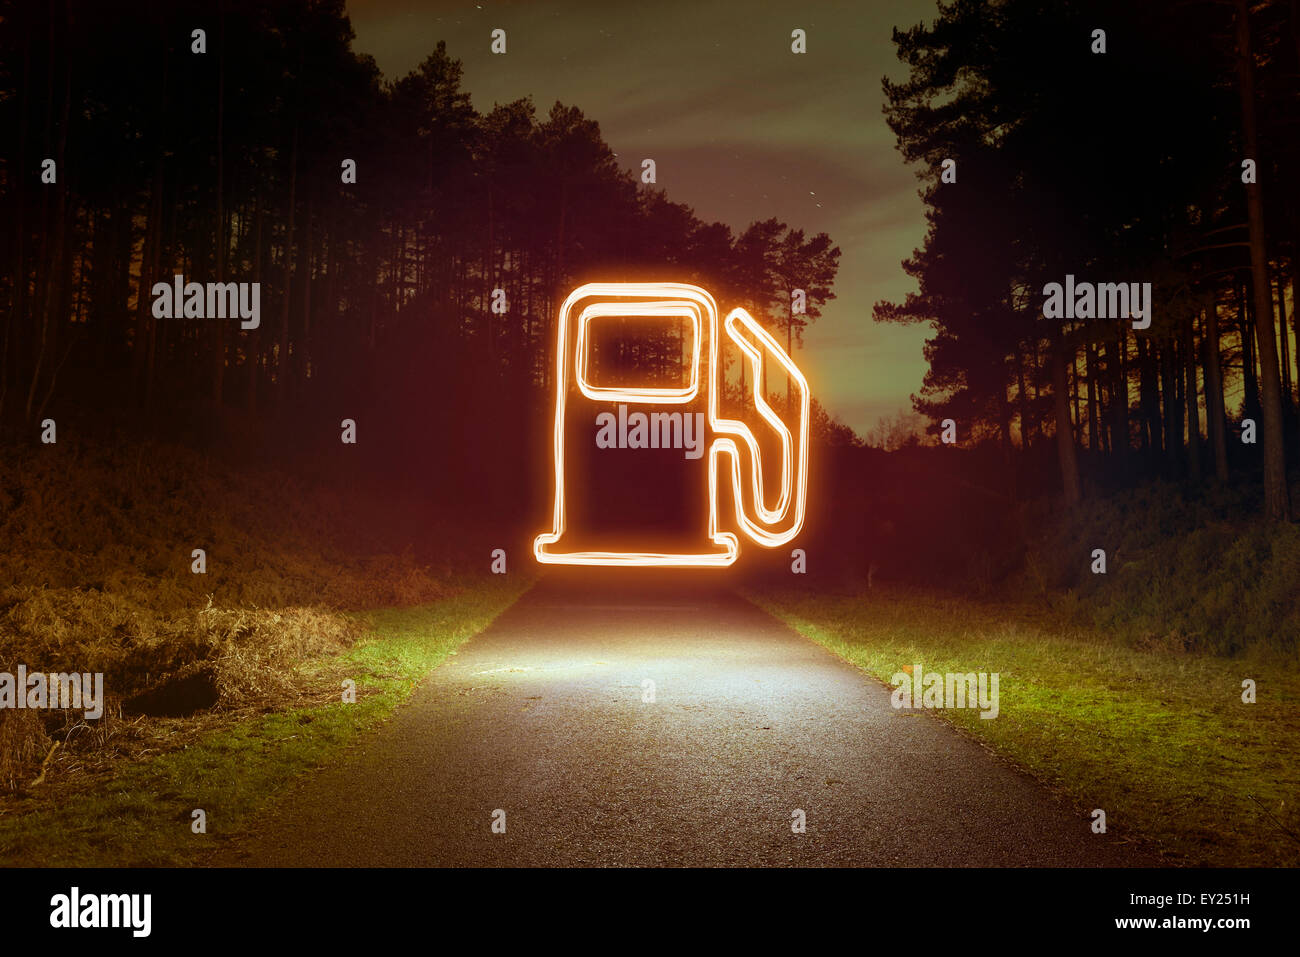 Glowing gas pump symbol above forest road at night Stock Photo